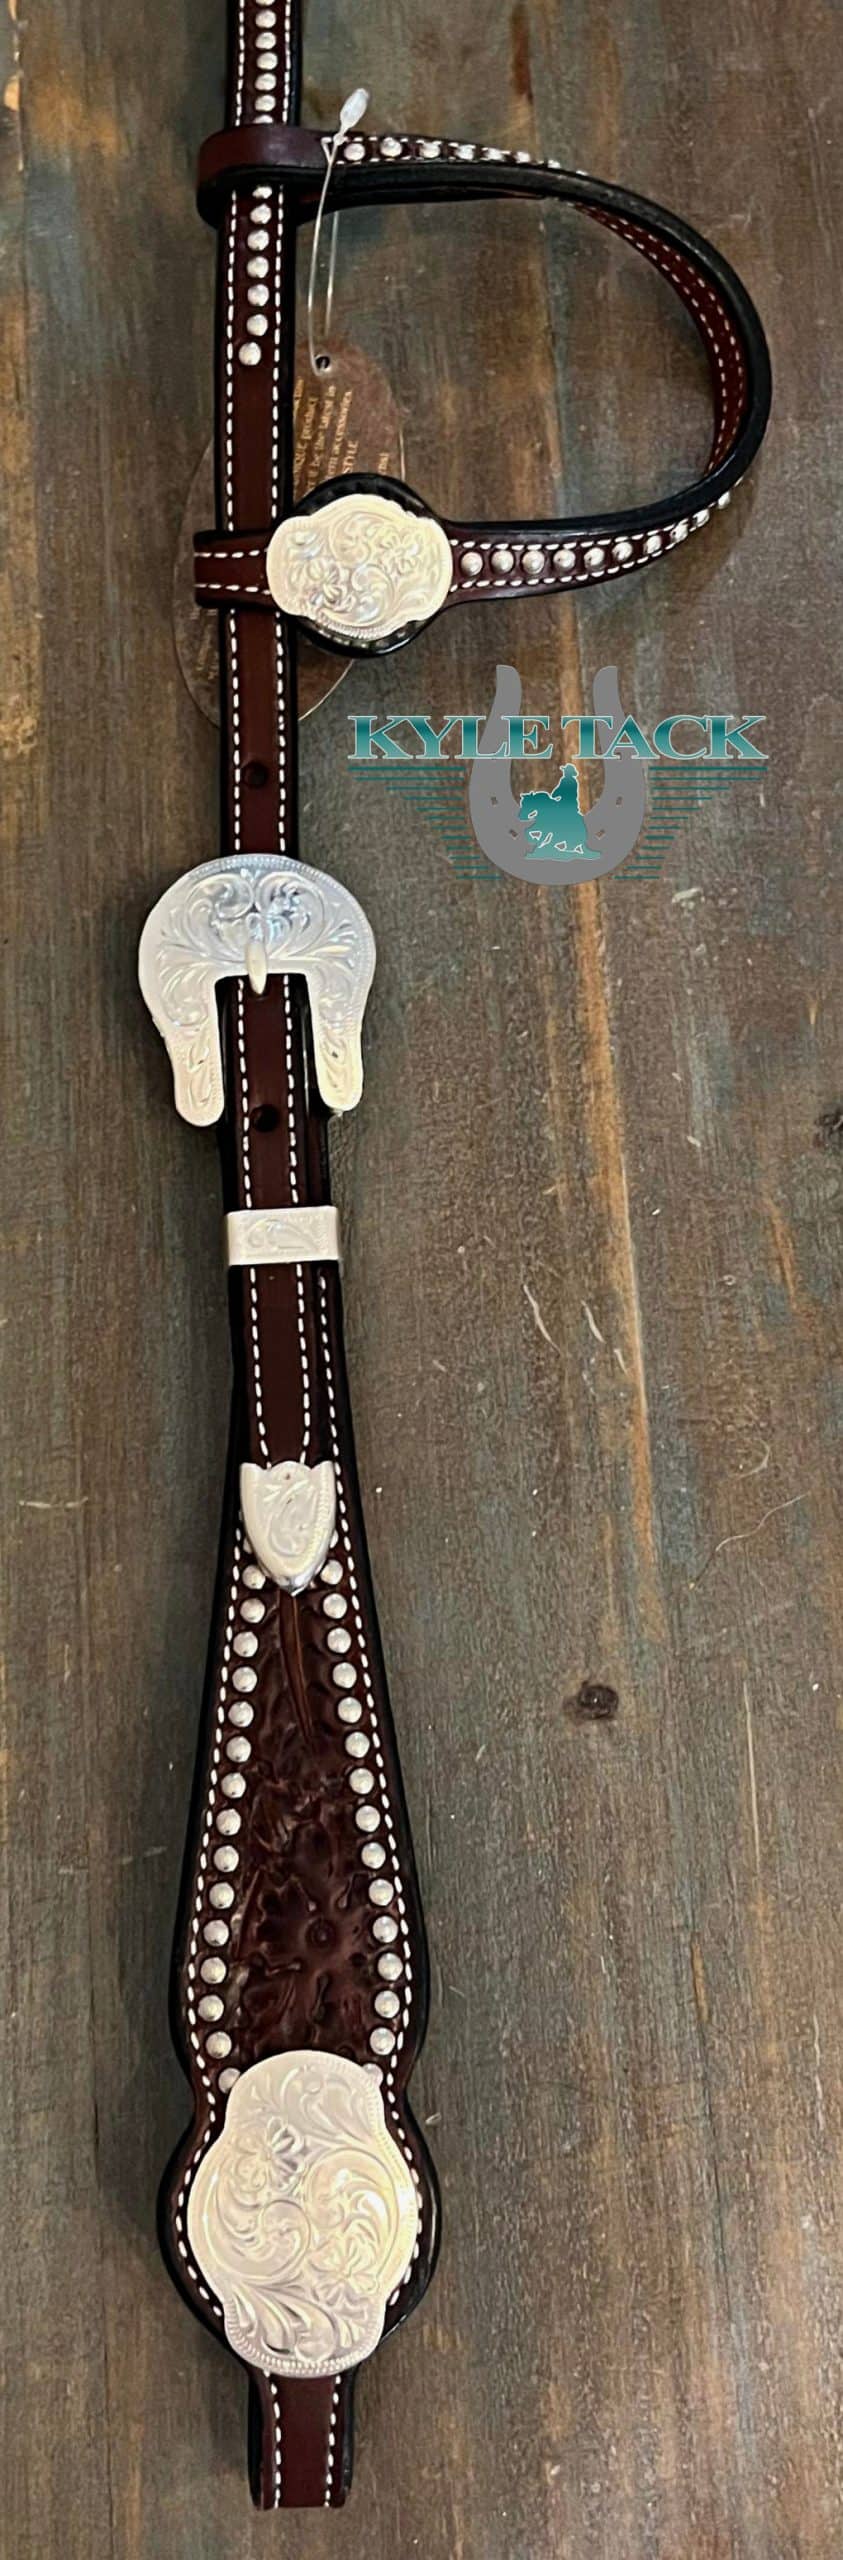 Cowperson Tack Headstall – Kyle Tack